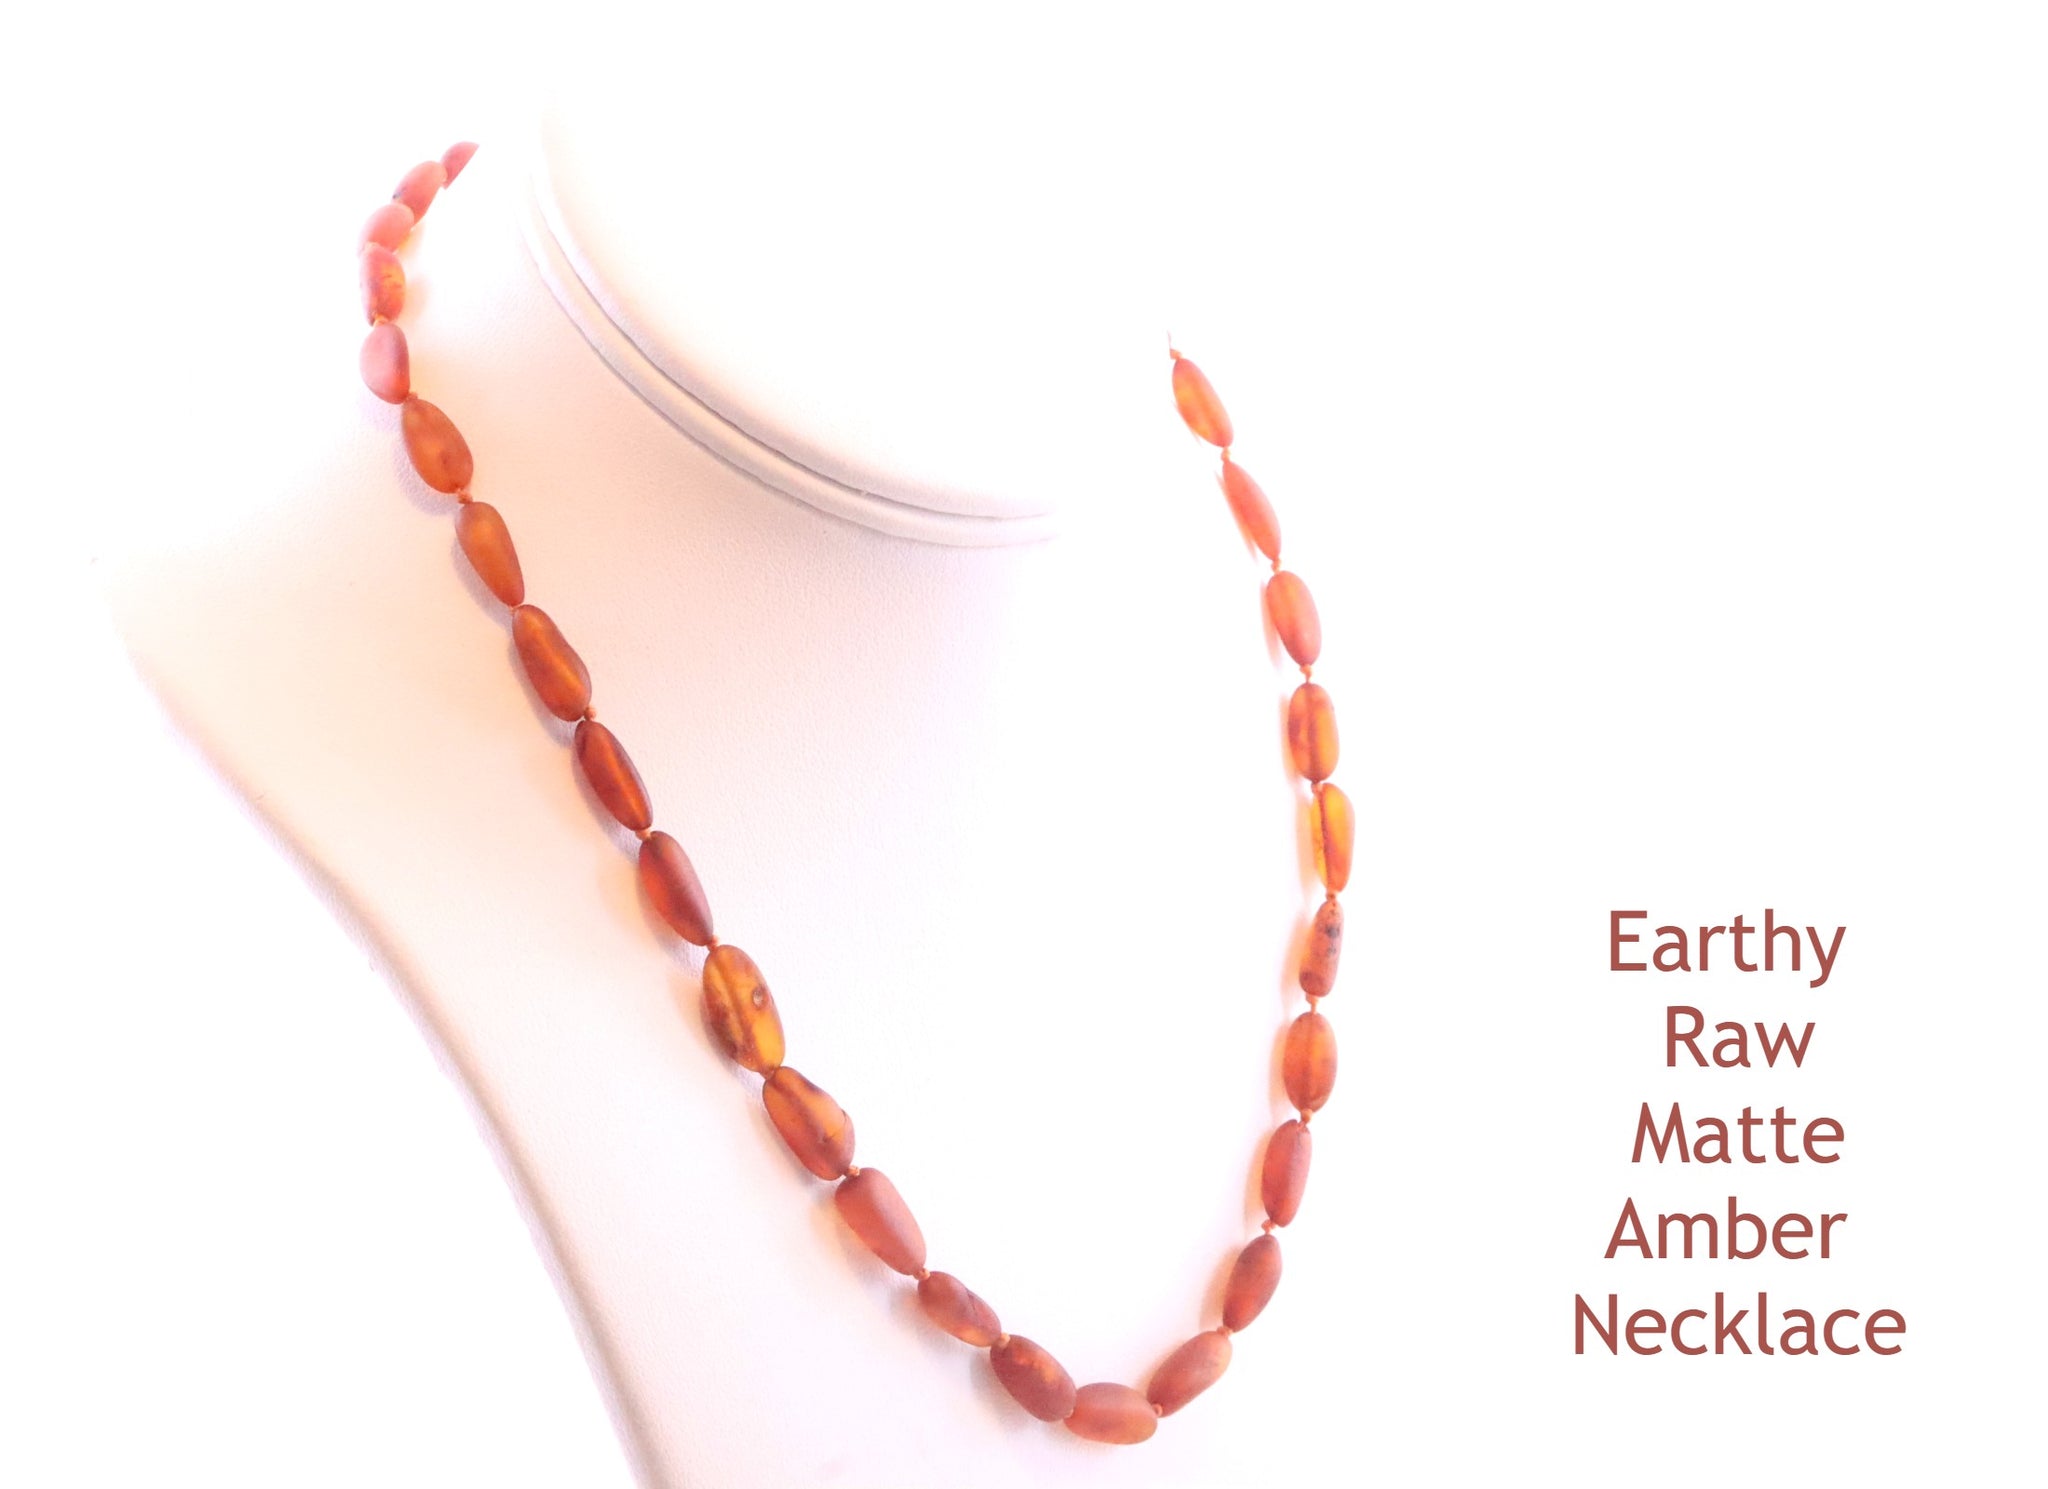 Earthy Raw Matte Amber Necklace